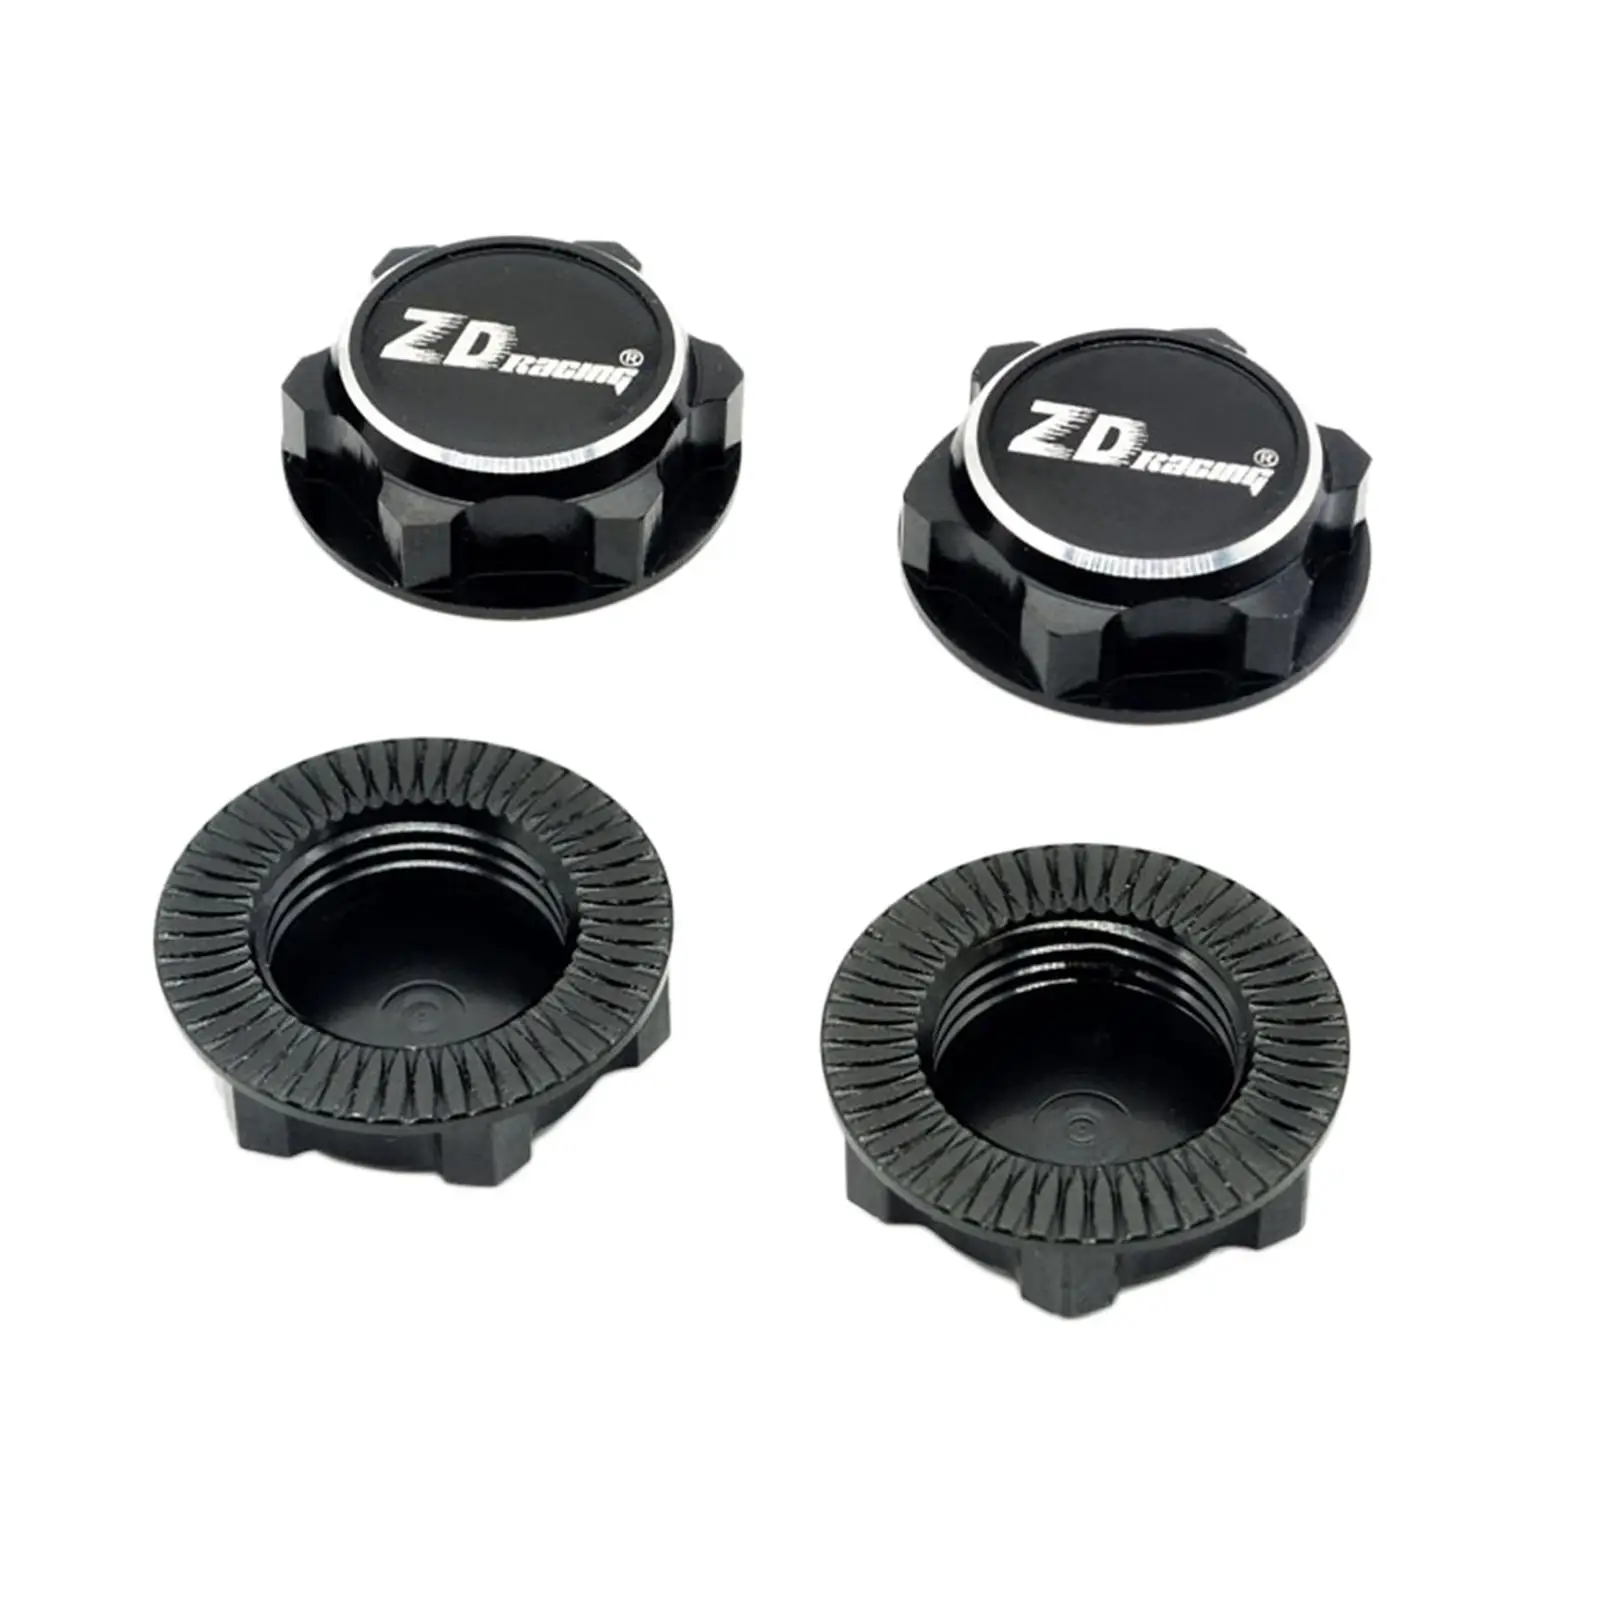 4x17mm Hex Wheel Nuts Set, Dustproof Mount , for 1/8 Scale RC Car Off-Road Car Climbing Car Replacement